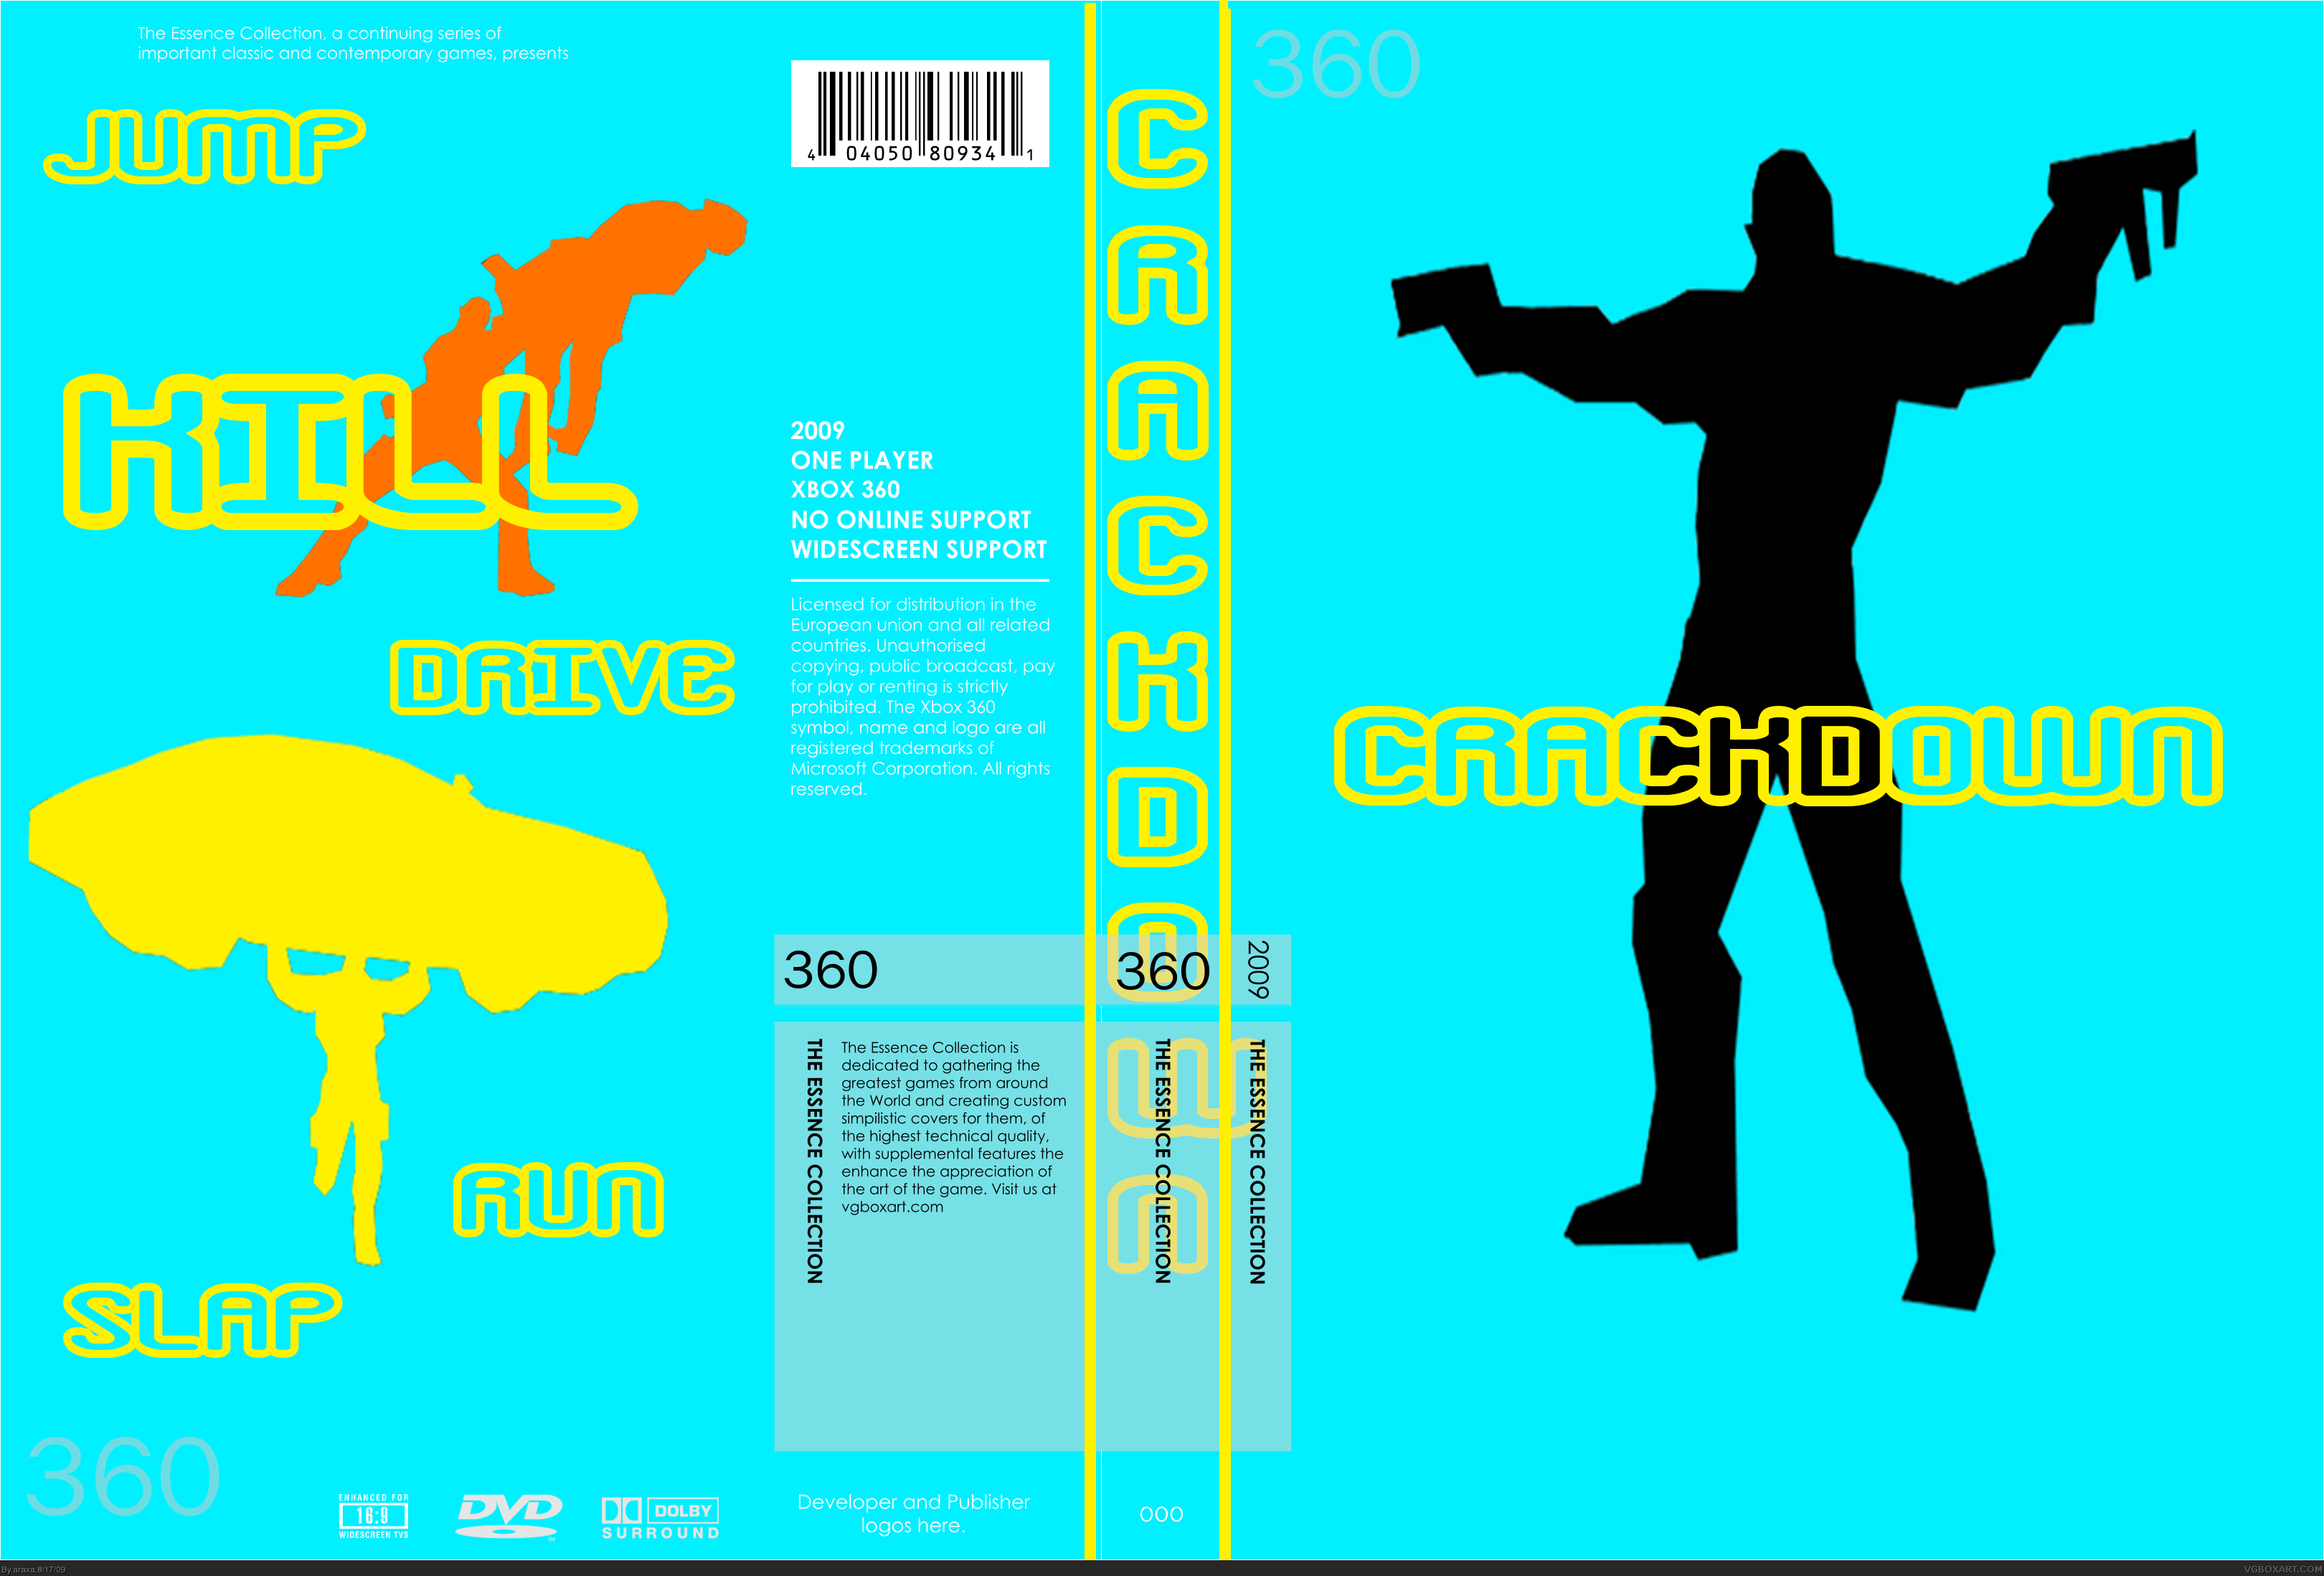 Crackdown box cover